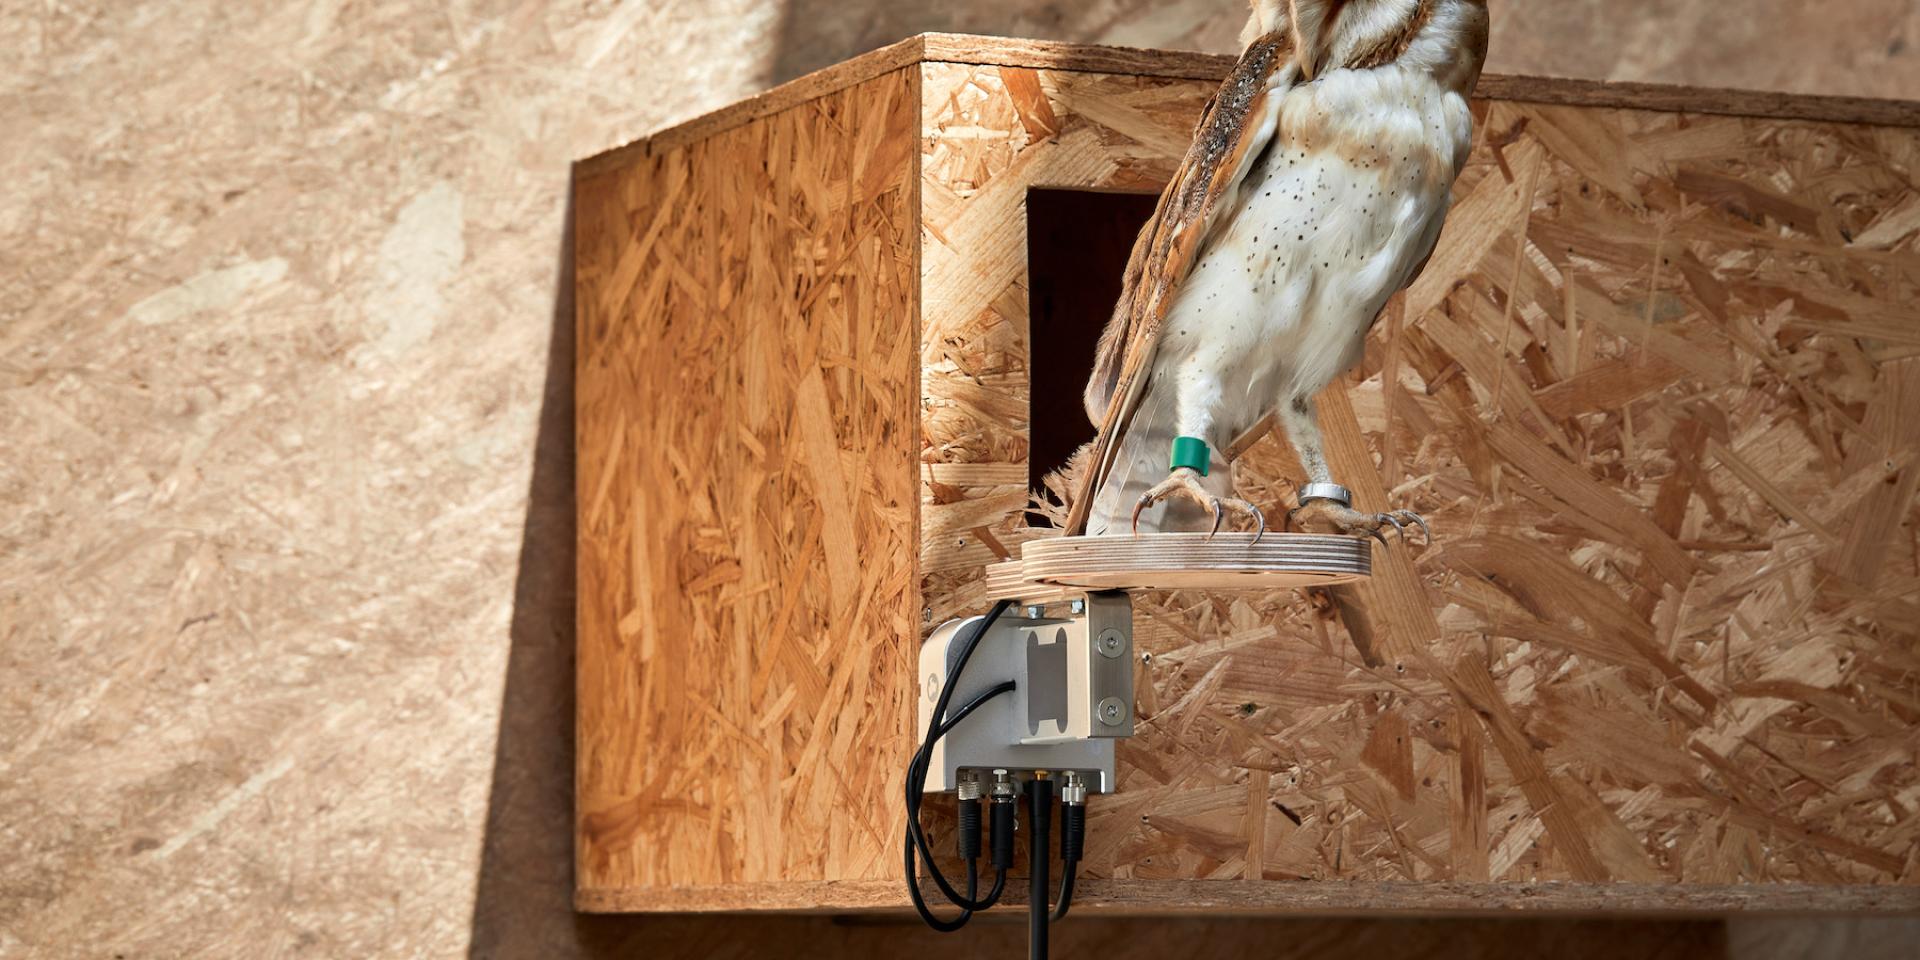 Barn Owl with Nestbox